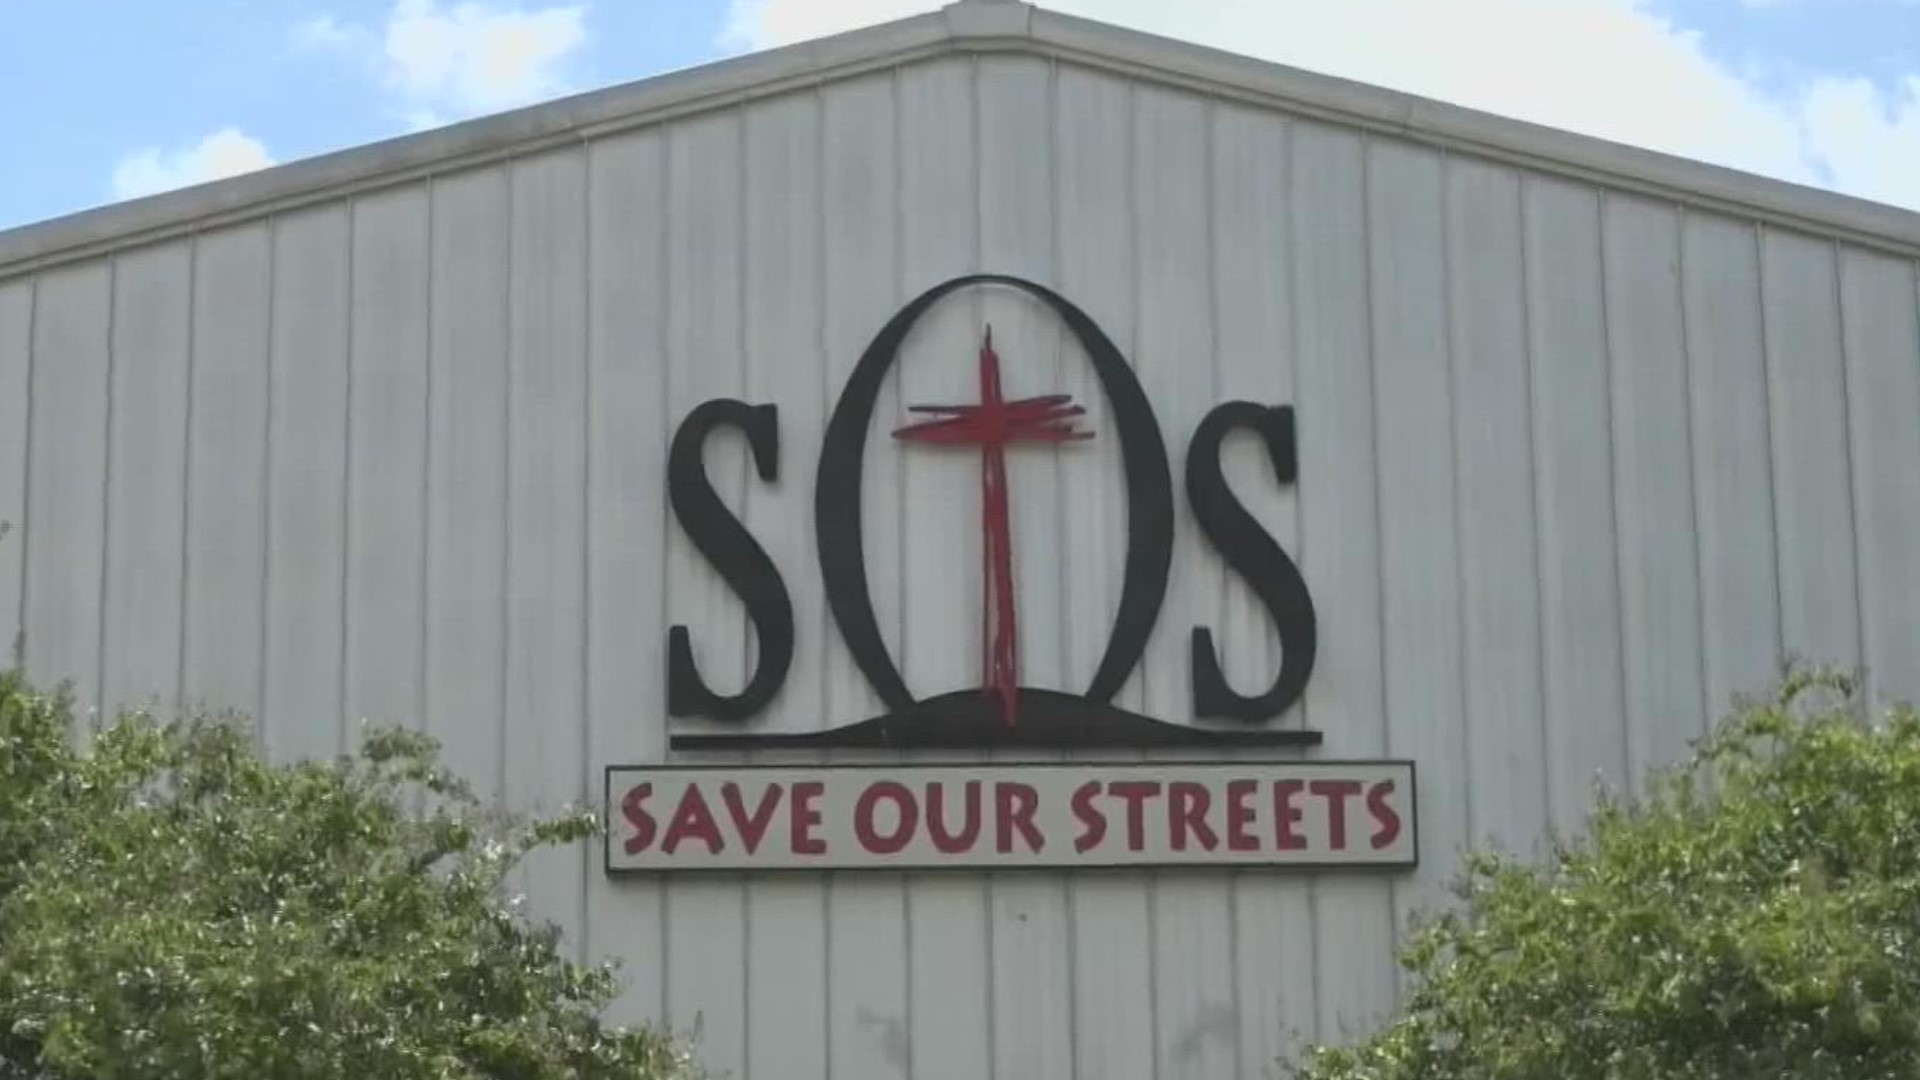 J.J. Ramirez, the Founder of SOS Ministries, said that he began to weep after seeing the amount collected in the first few weeks